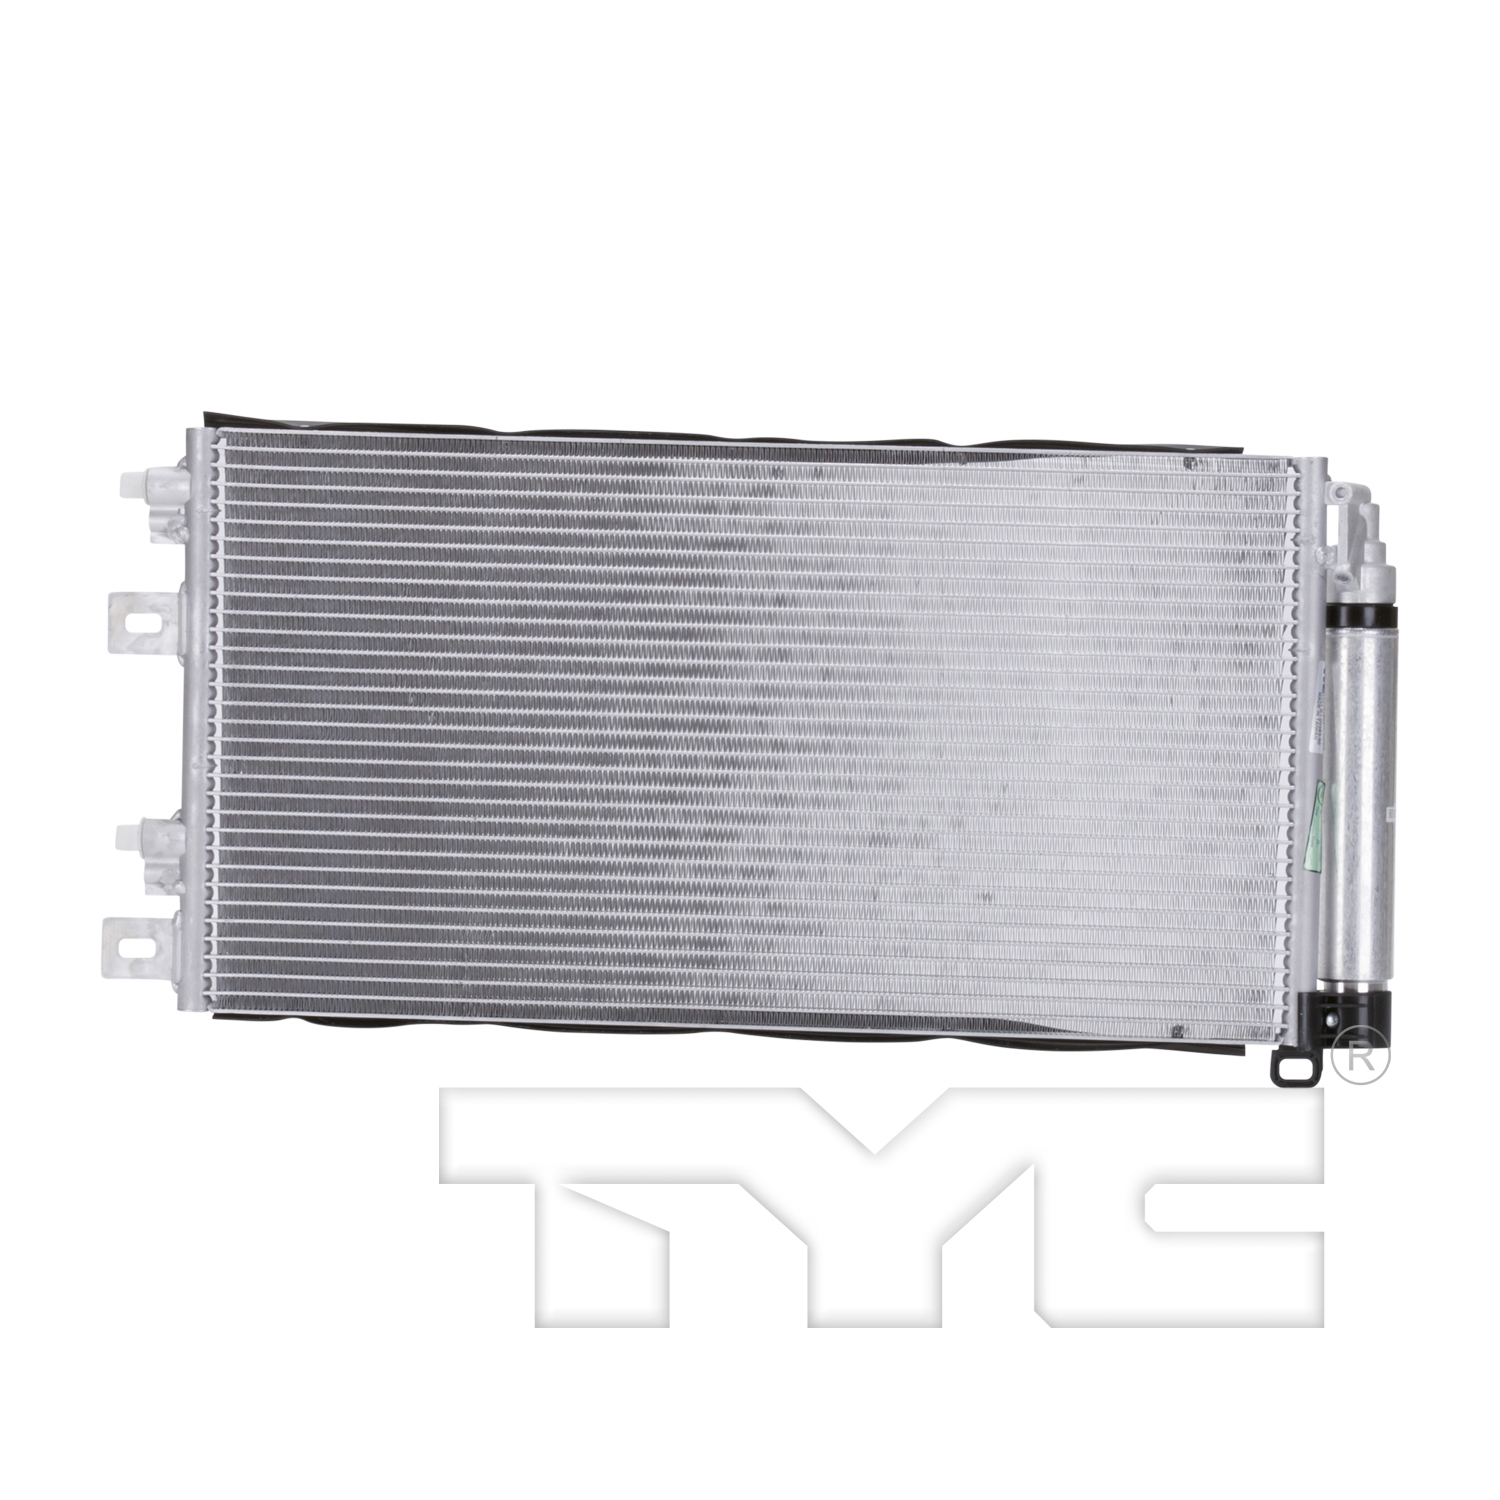 Aftermarket AC CONDENSERS for MINI - COOPER, COOPER,02-06,Air conditioning condenser